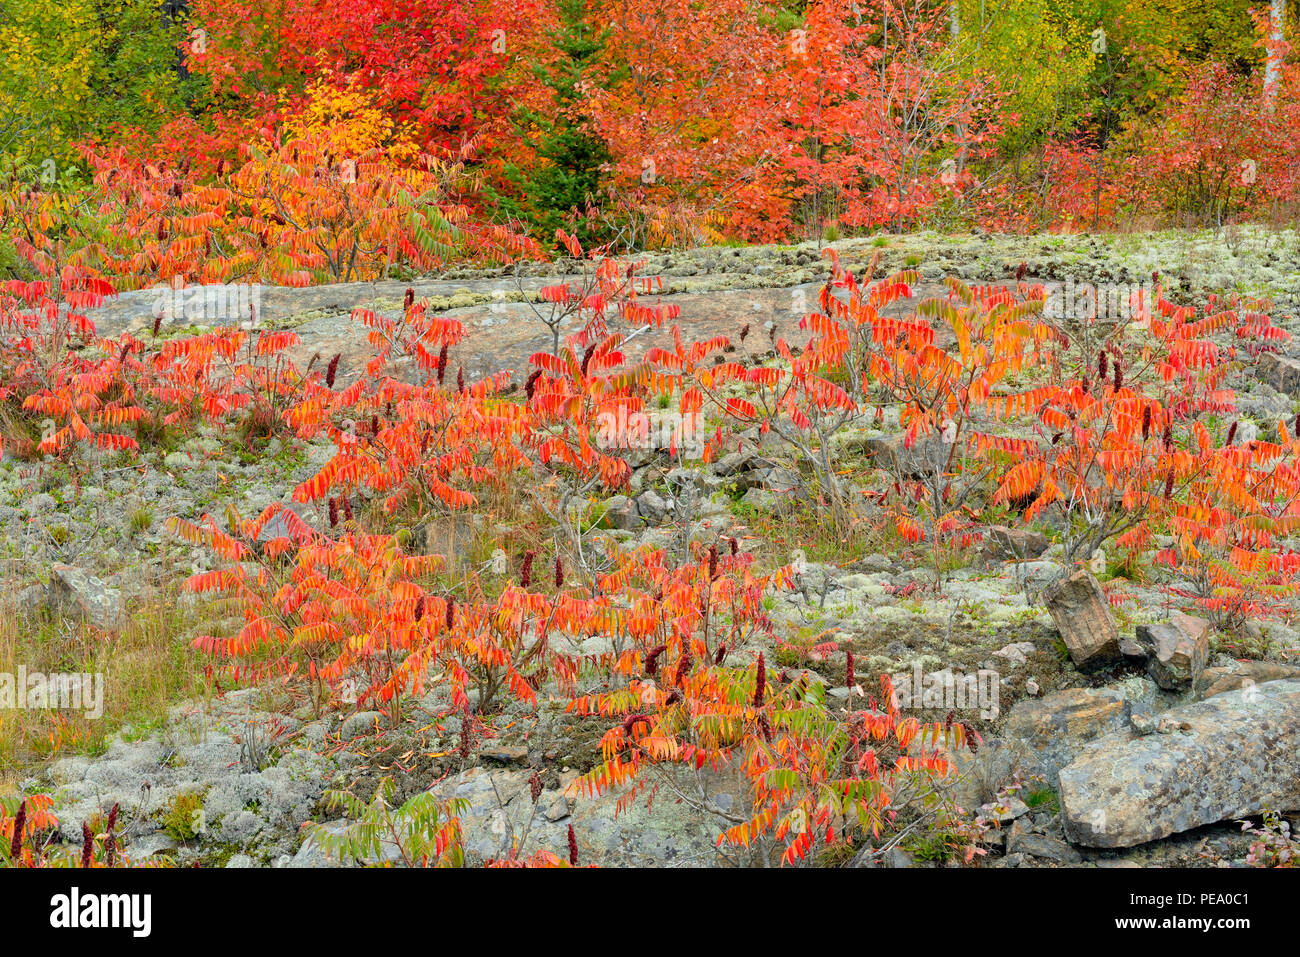 Rock outcrop with autumn staghorn sumac (Rhus typhina), French River, Ontario, Canada Stock Photo